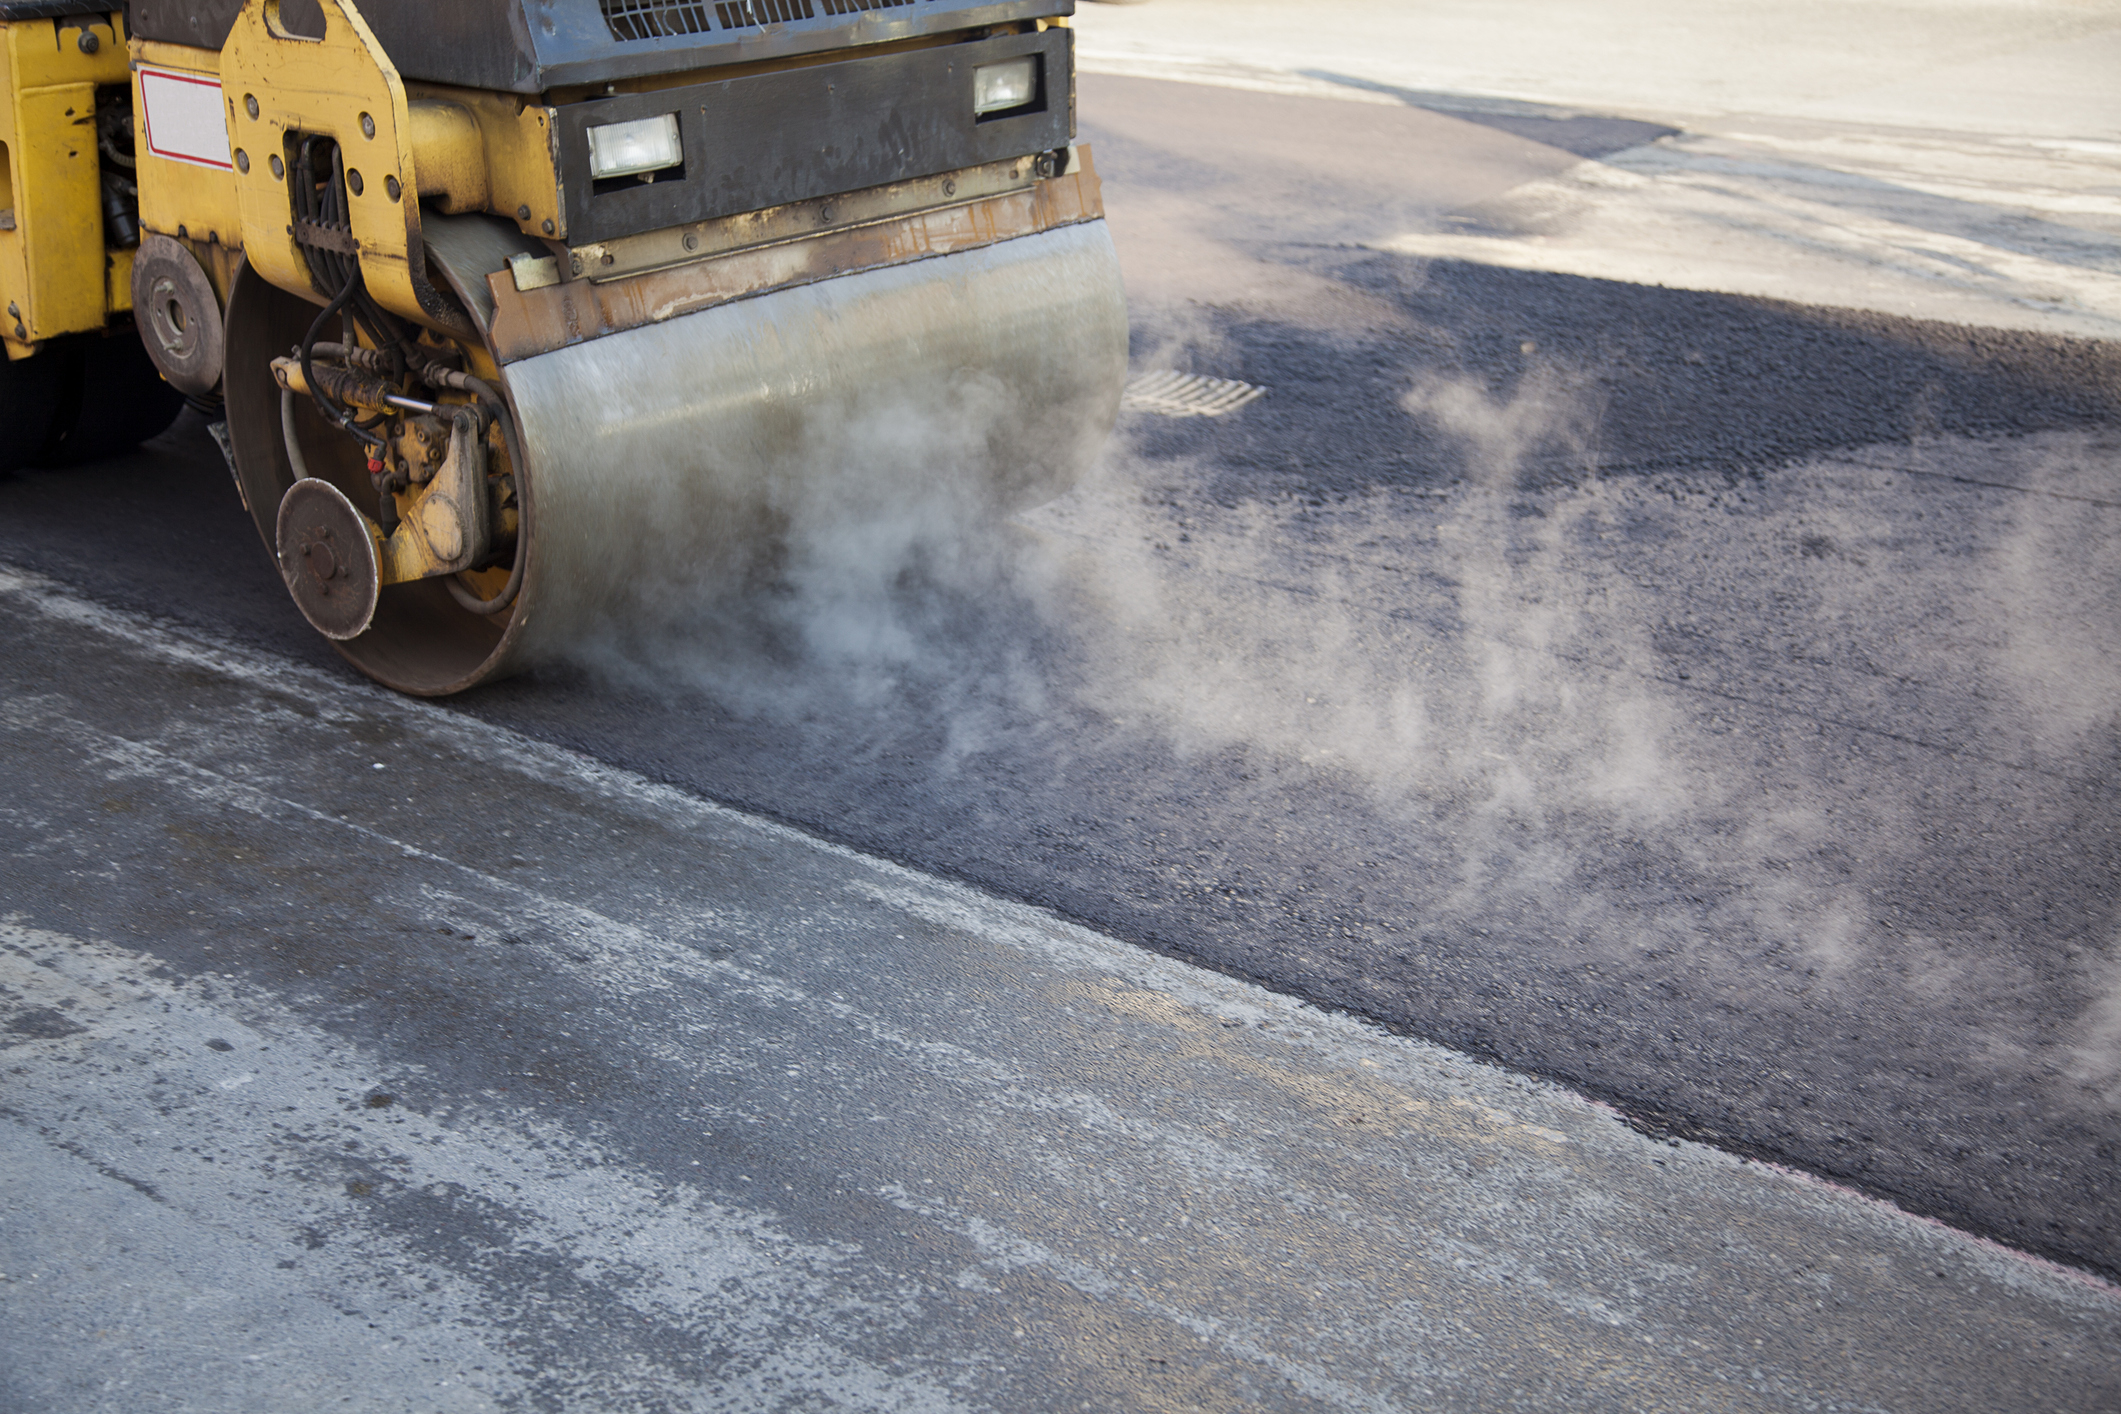 Road roller smoothing asphalt with steam rising during road construction. No people visible